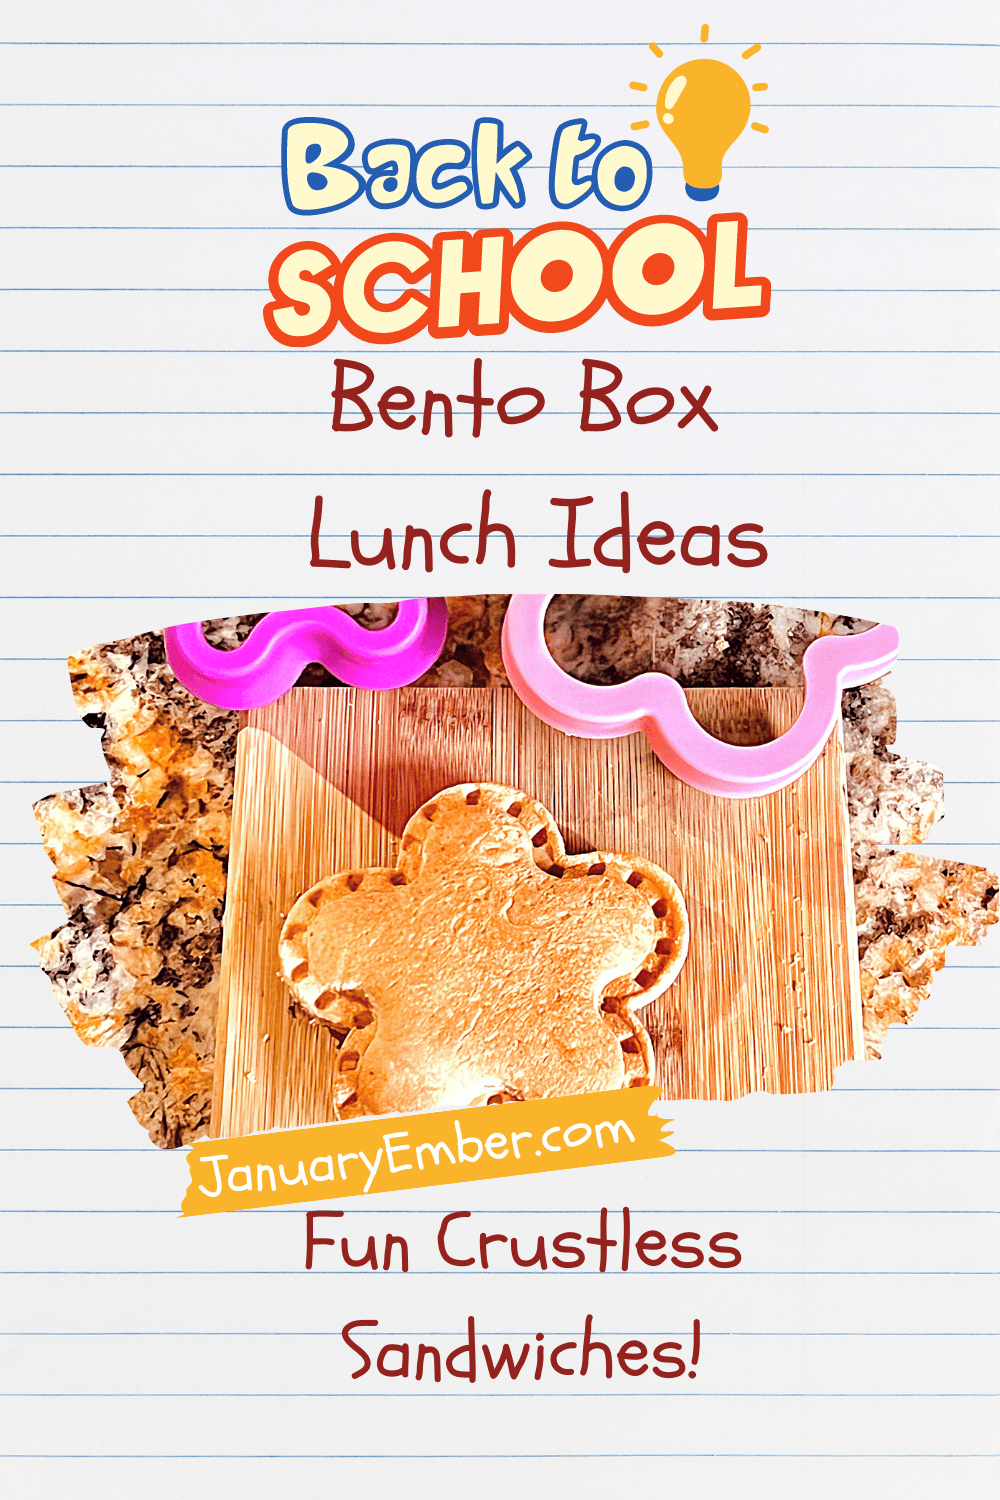 10 Tools for making Fast Back to School Bento Box Lunches